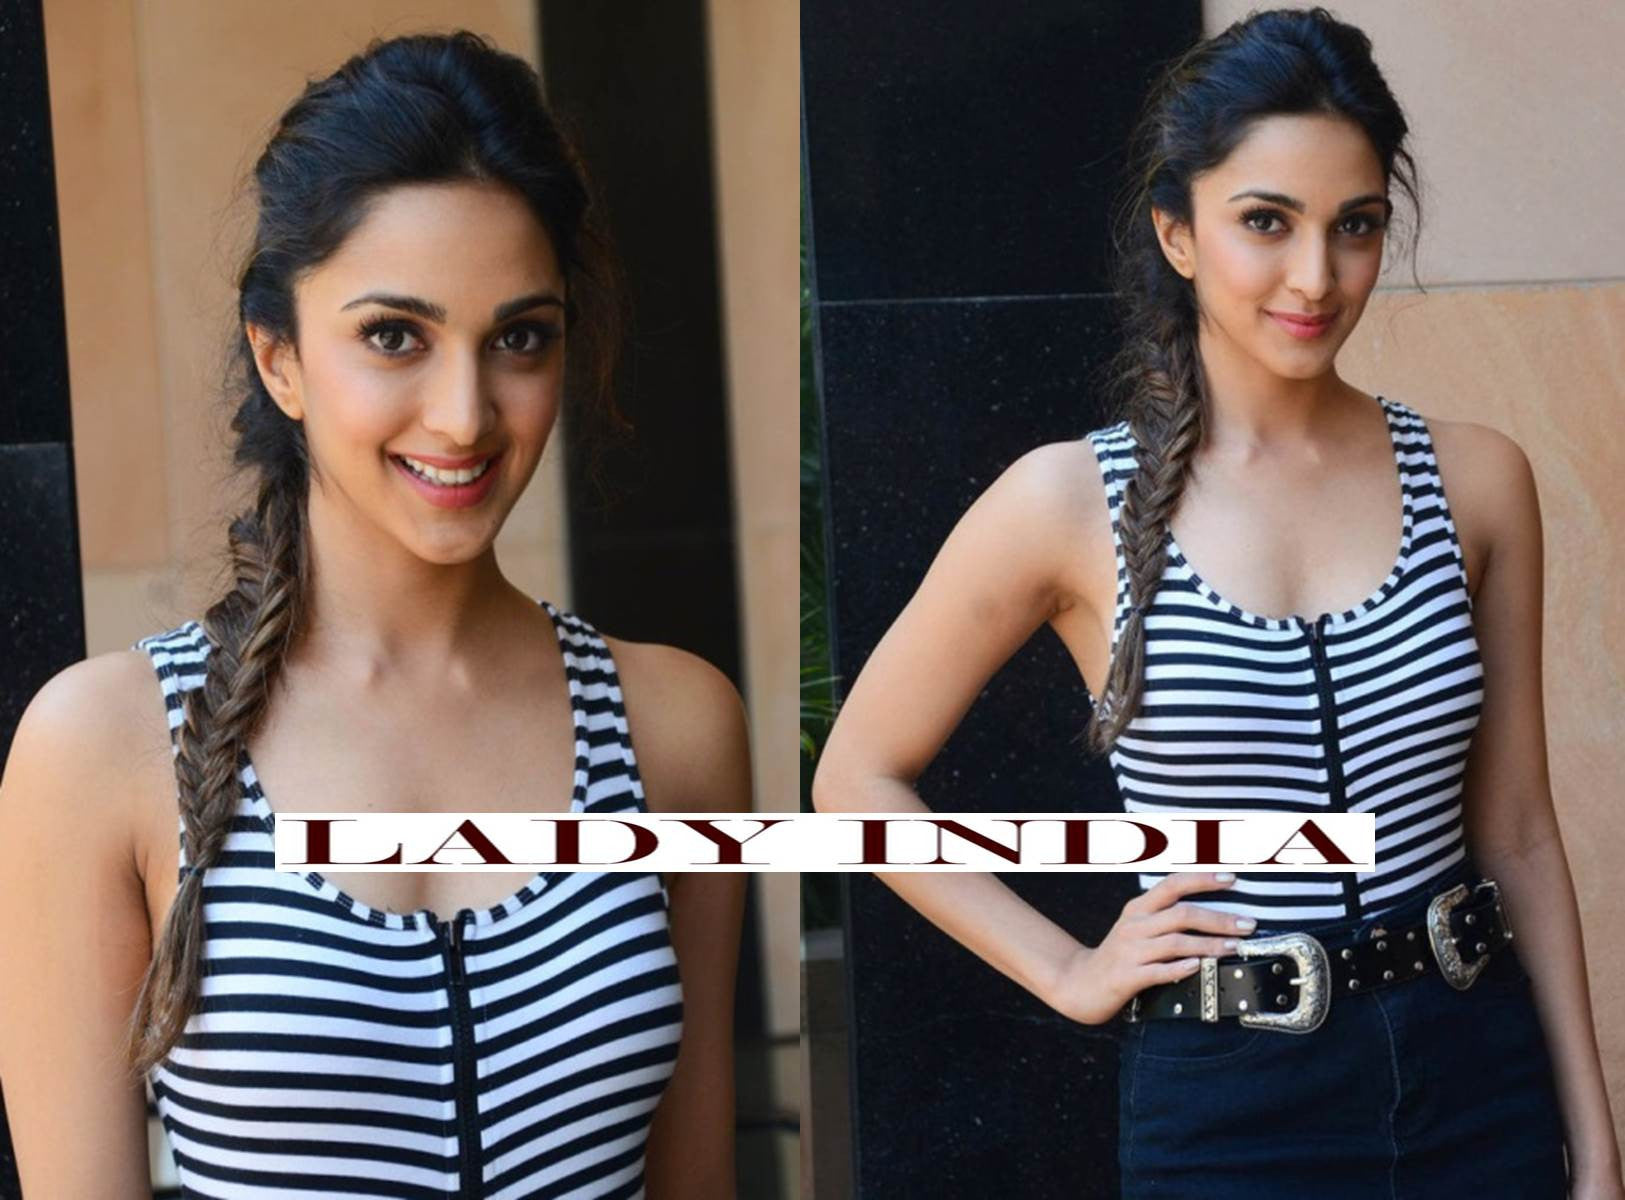 Kiara Advani in striped tank top featuring a front zipper and a threaded navy blue skirt